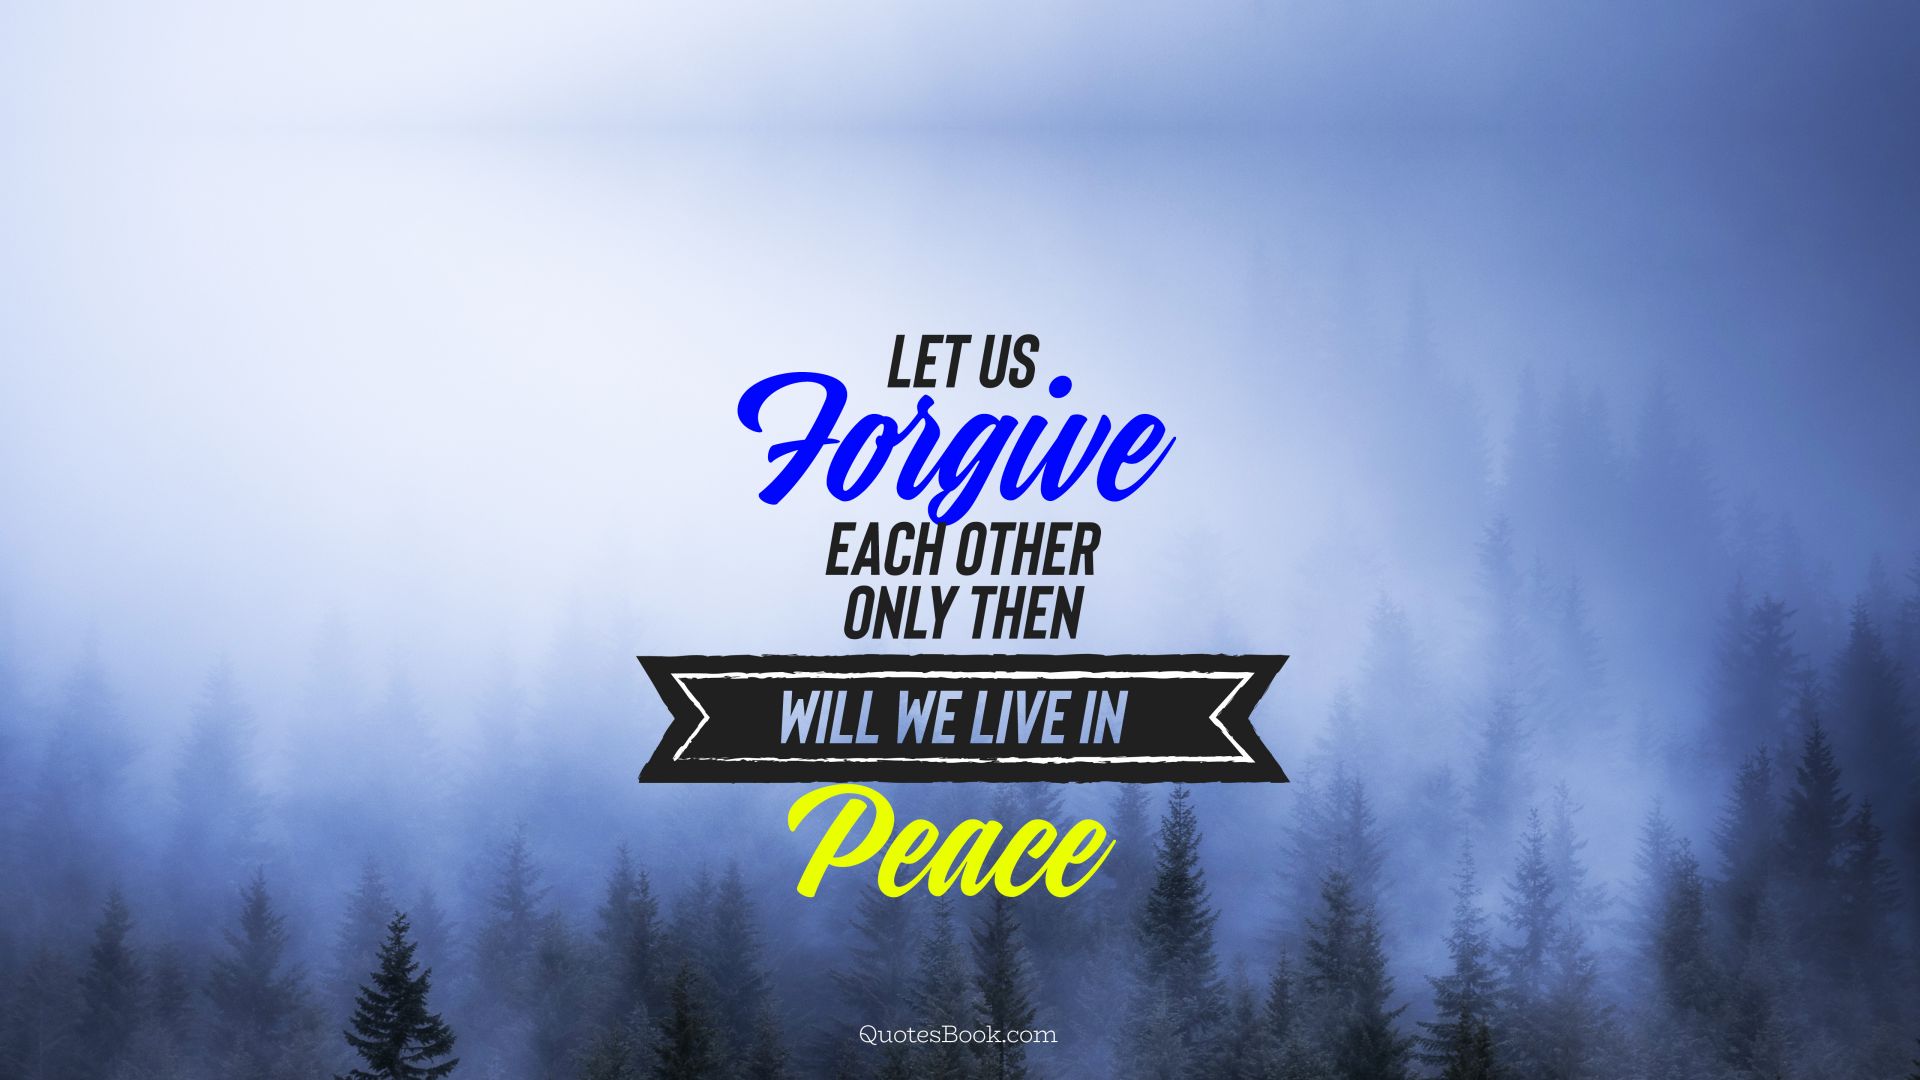 Let us forgive each other only then will we live in peace